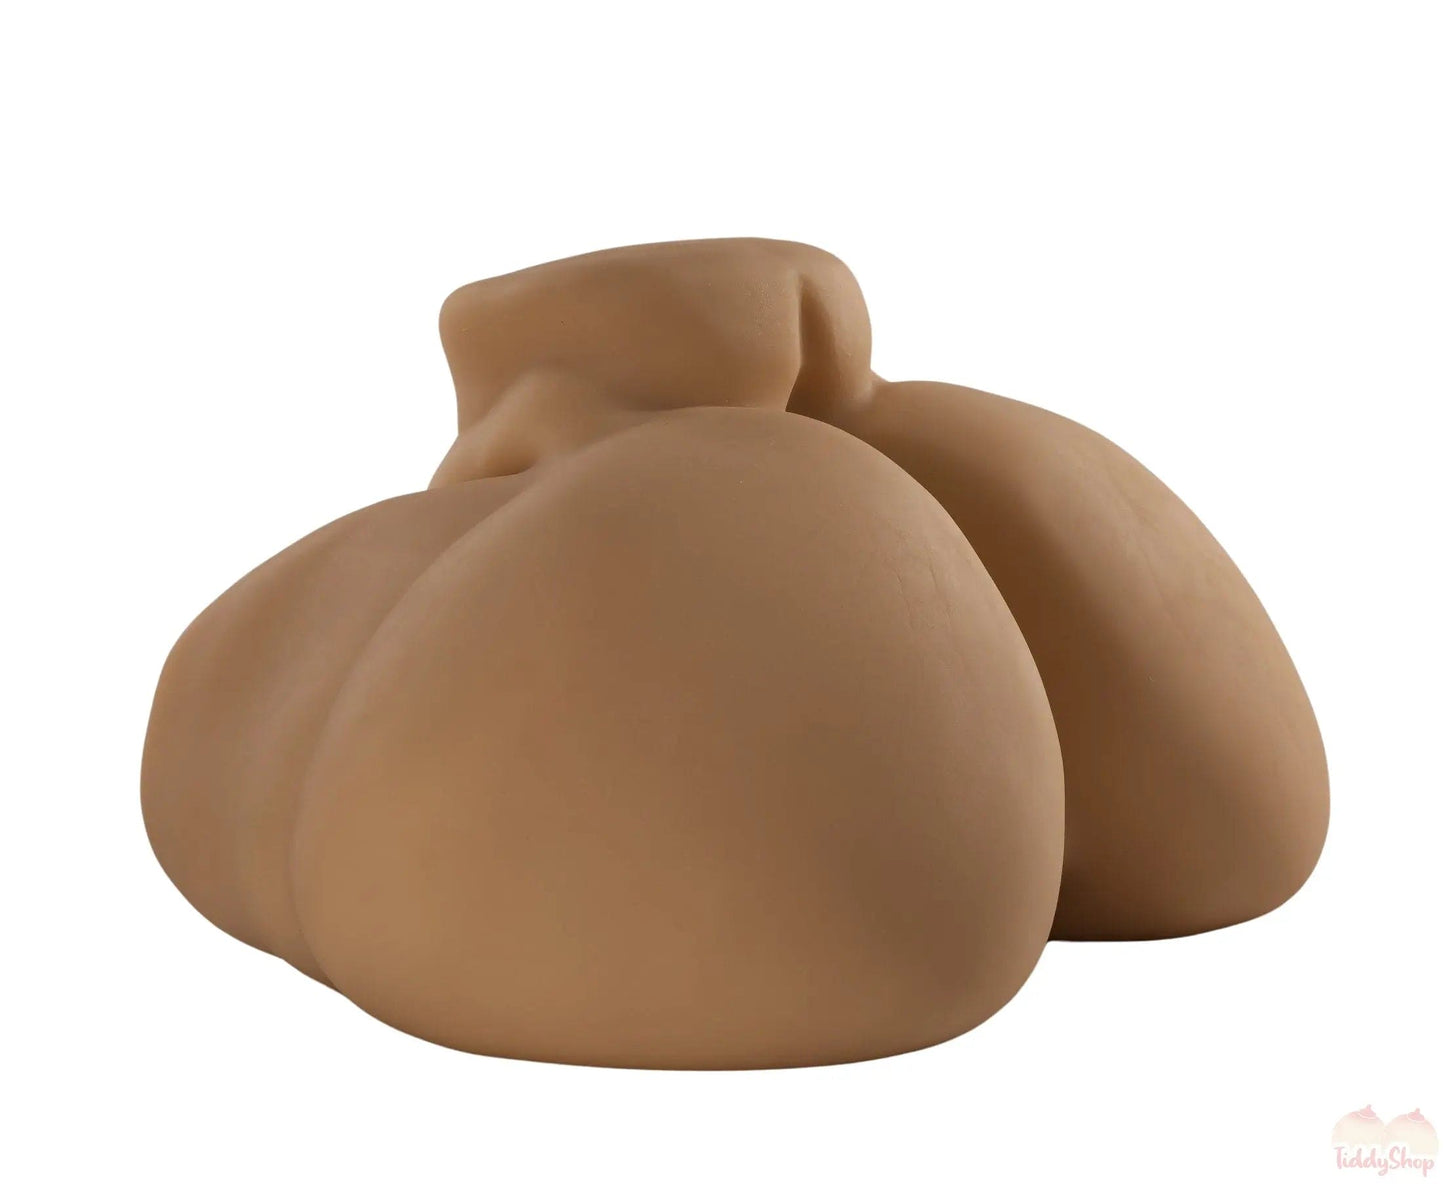 TiddyShop Heavenly Madame Squishable - JelloJiggles BBW Pear Gigantic Ass 94lb (43 kg)  - Extremely Jiggly Huge Booty Giant Butt Hip Toy Onahole - TiddyDollHouse TiddyShop Wheat-Fully-Gel-Filled-in-first-video-No-added-col